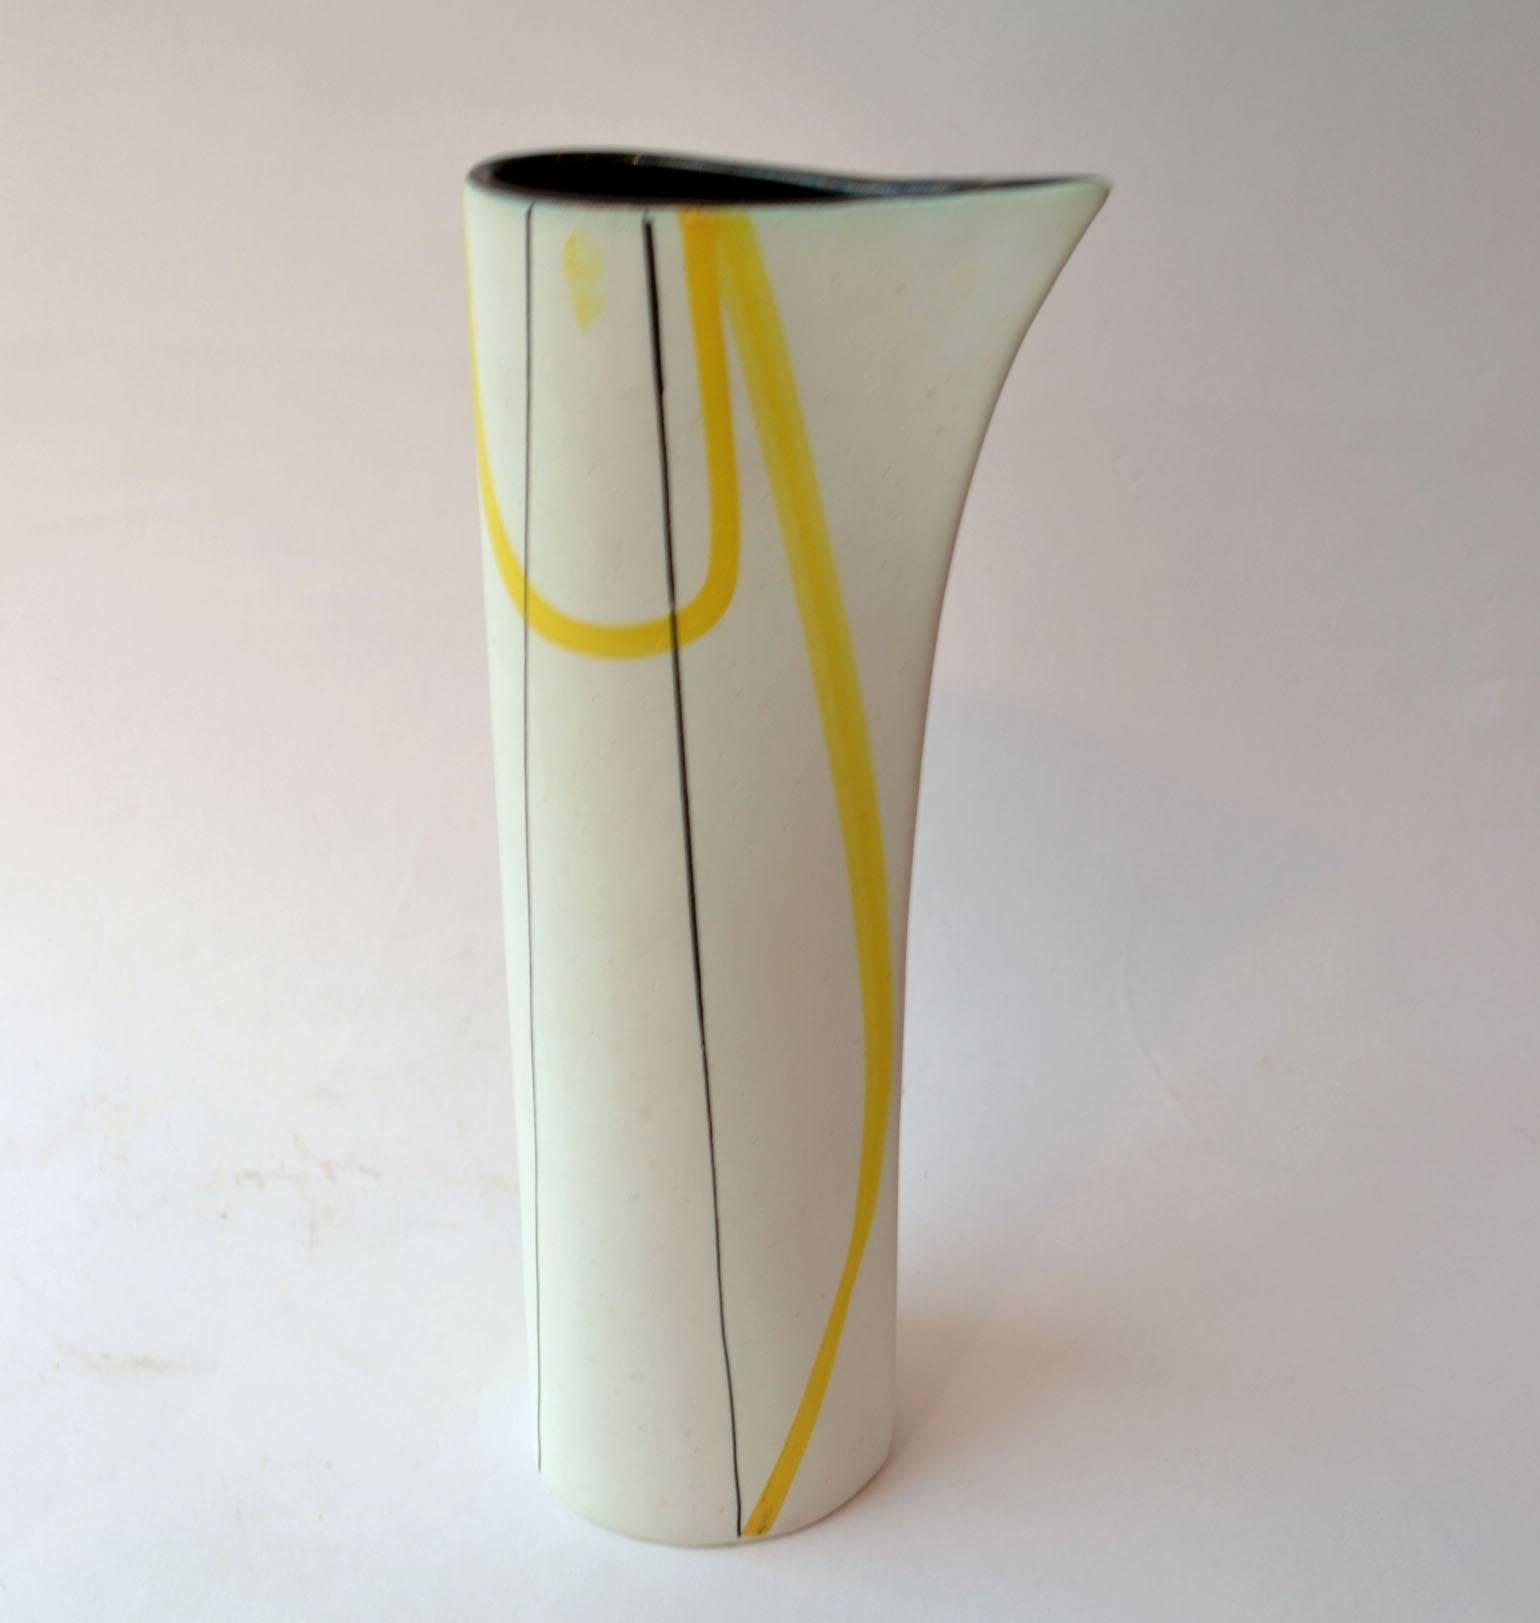 This white jug sculptural in its form is decorated with yellow and black curvaceous lines typical for the 1950s.
The jug is made in the famous ceramic destination Vallauris, France.